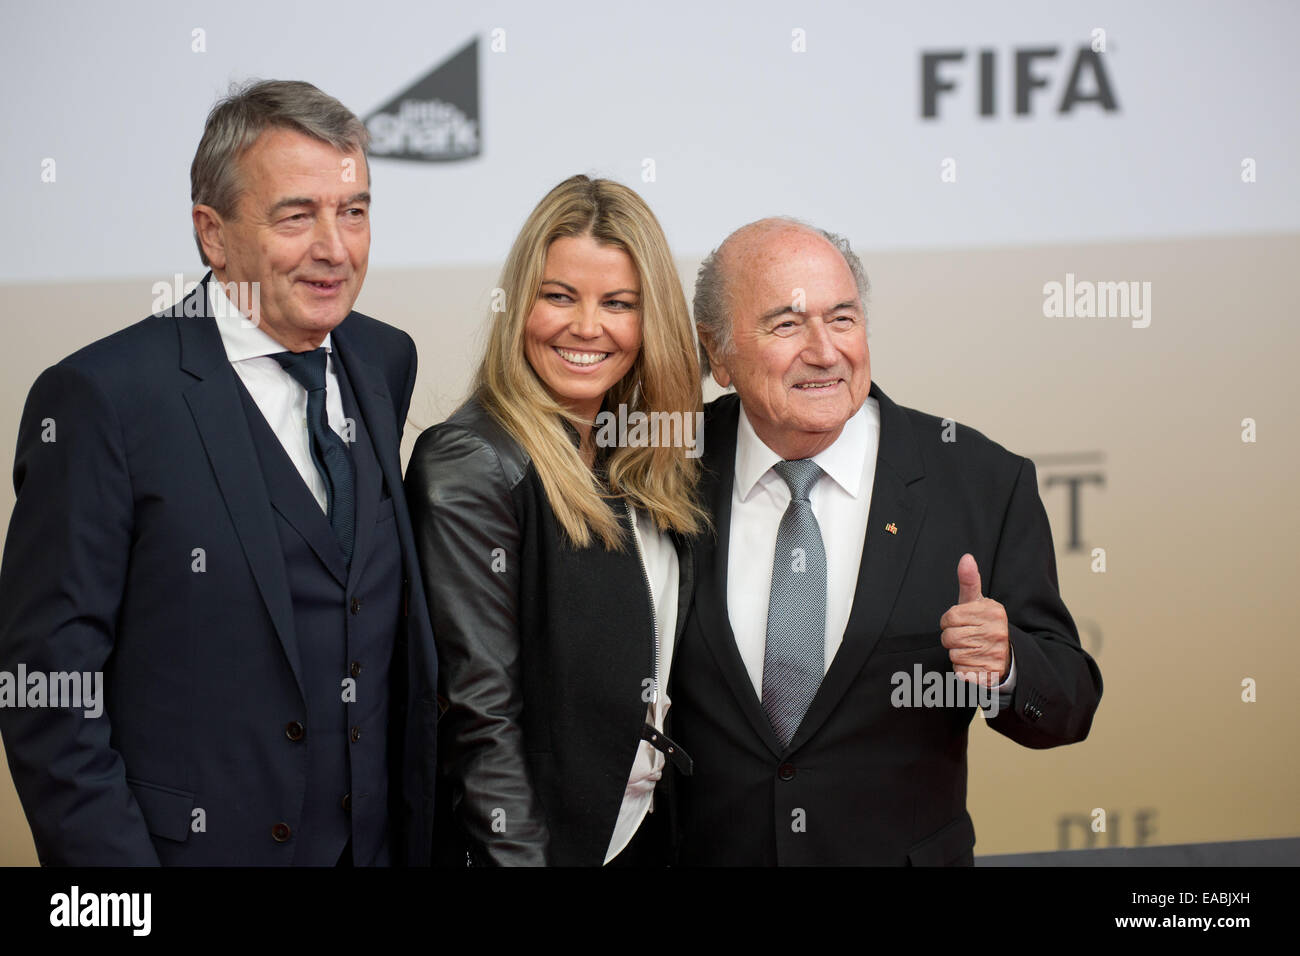 Sony Center, Potsdamer Platz, Berlin, Germany. 10th Nov, 2014. President of the German Football Association Wolfgang Niersbach (L) and his girlfriend Marion Popp arrive with FIFA President Joseph Blatter (R) for the world premiere of the film 'Die Mannschaft' (lit. 'The team') at the Cinestar movie theater at Sony Center, Potsdamer Platz, Berlin, Germany, 10 November 2014. The film is the official documentary of the FIFA Soccer World Championship 2014 in Brazil. PHOTO: Joerg Carstensen/dpa/Alamy Live News Stock Photo